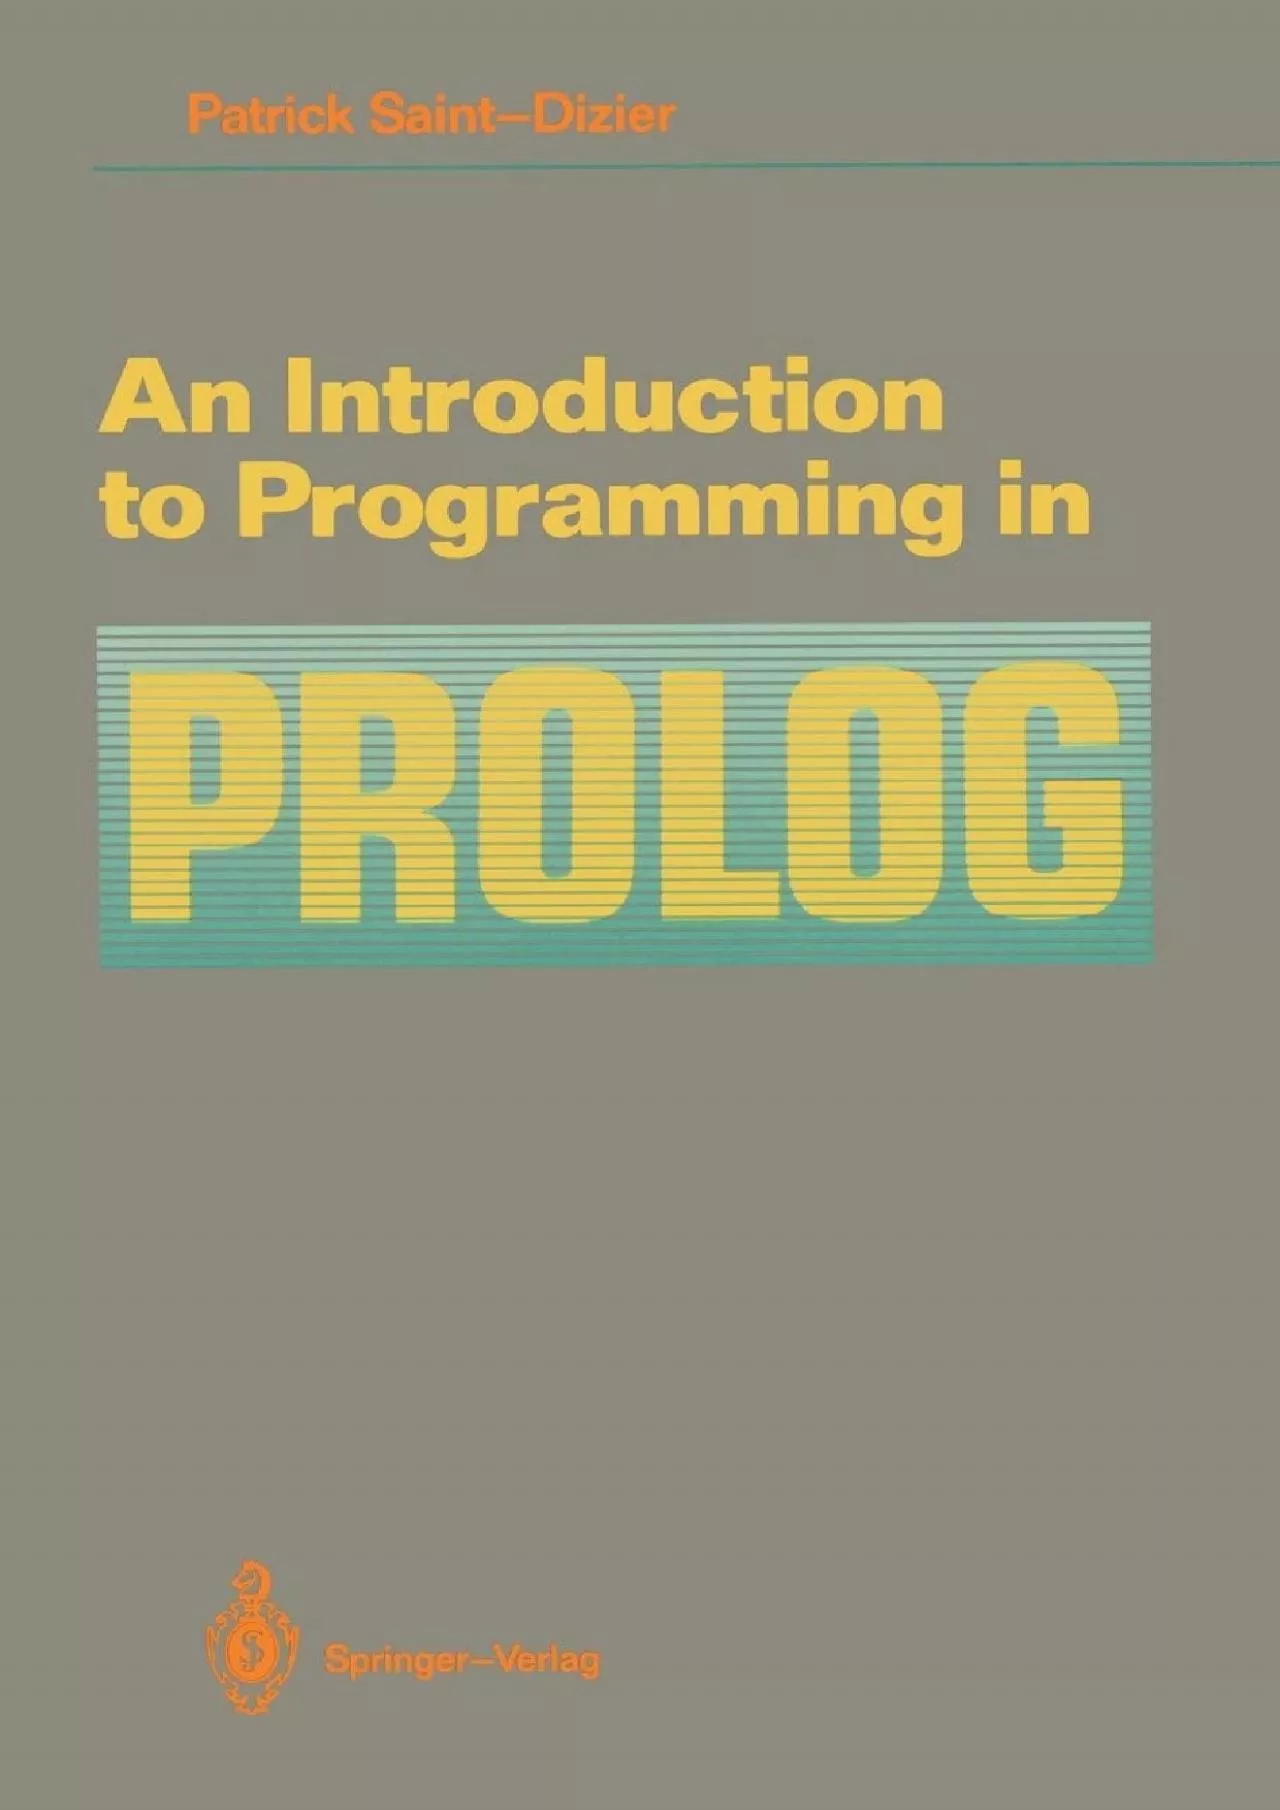 [FREE]-An Introduction to Programming in Prolog